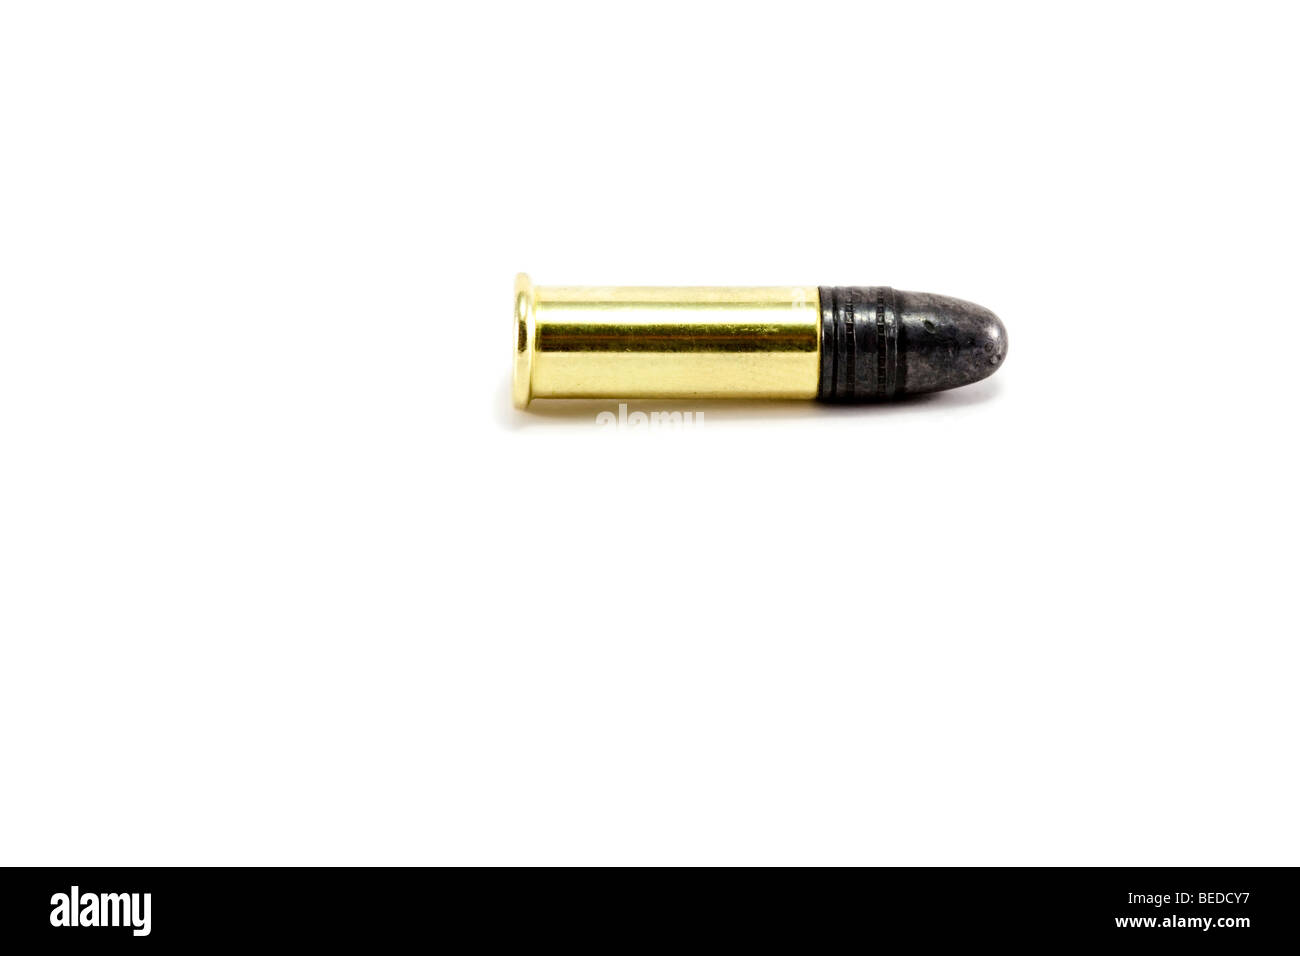 https://c8.alamy.com/comp/BEDCY7/a-small-22-bullet-isolated-on-white-BEDCY7.jpg